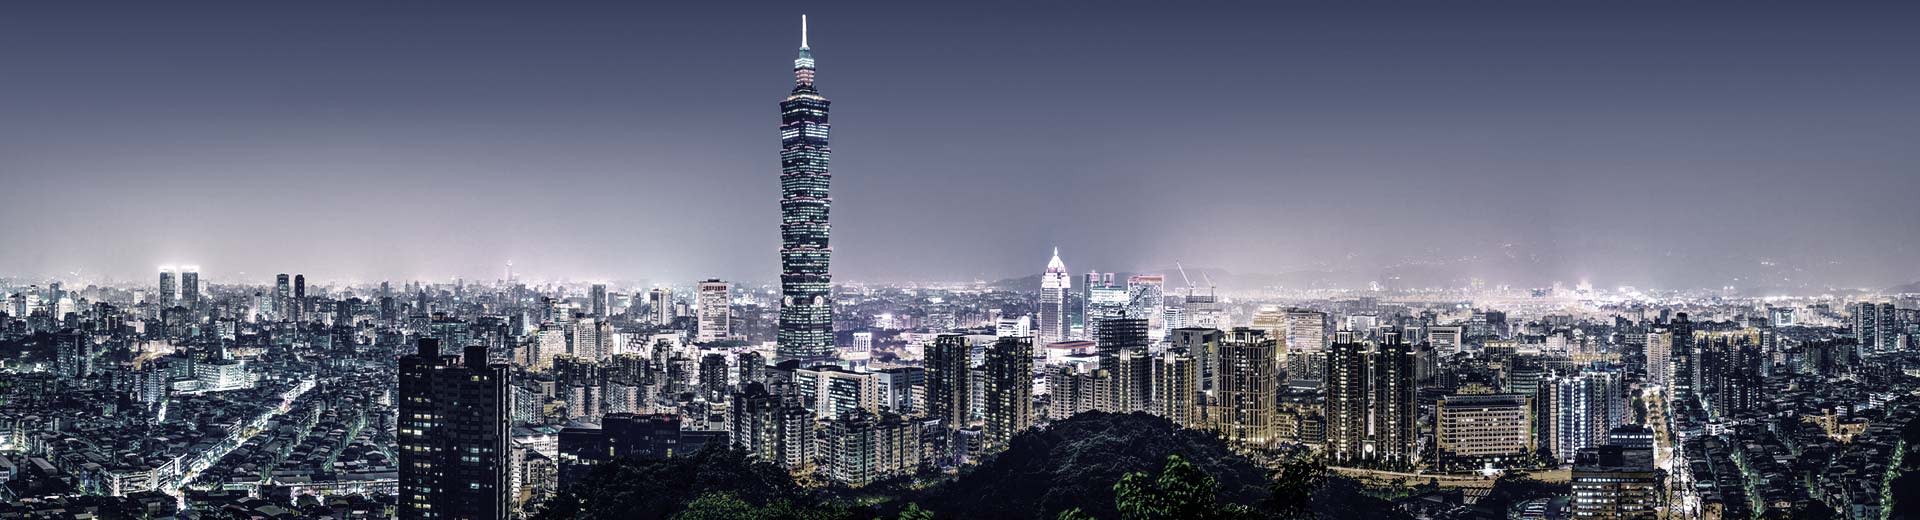 The glittering cityscape of Taipei, with innumerable skyscrapers and high-rise apartment complexes as far as the eye can see.